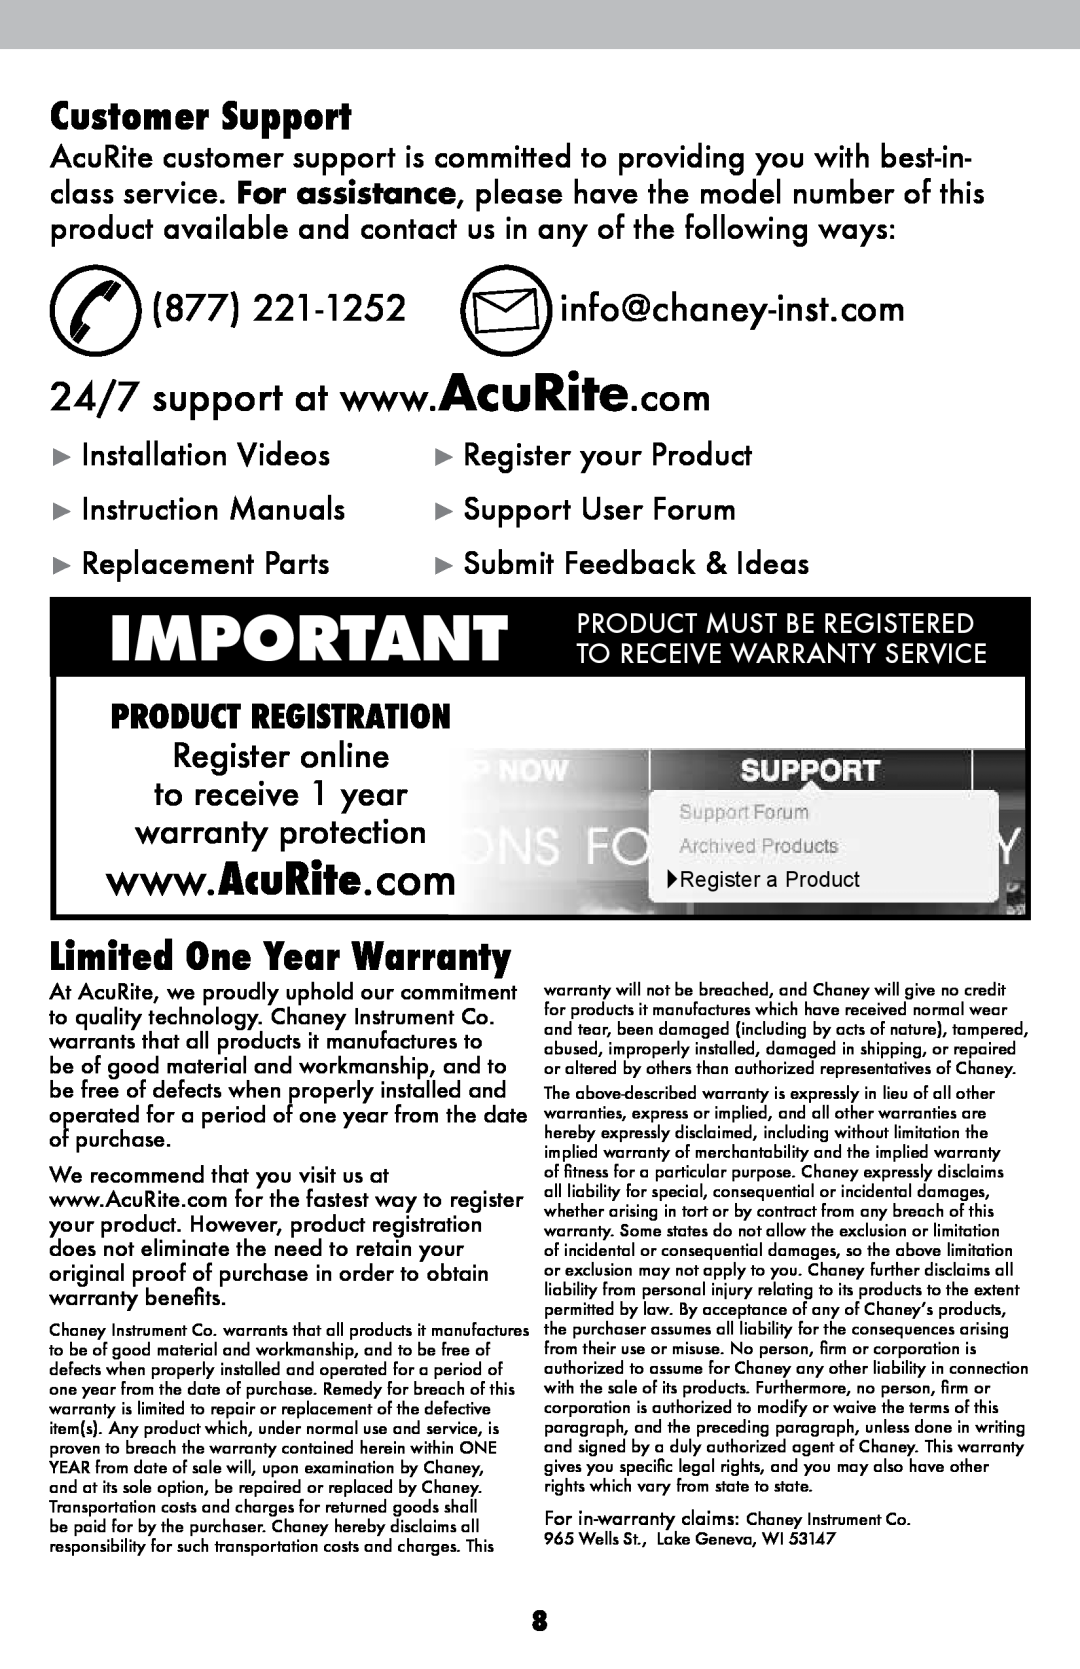 Acu-Rite 822 Customer Support, 877 221-1252 info@chaney-inst.com, Limited One Year Warranty, Register online 